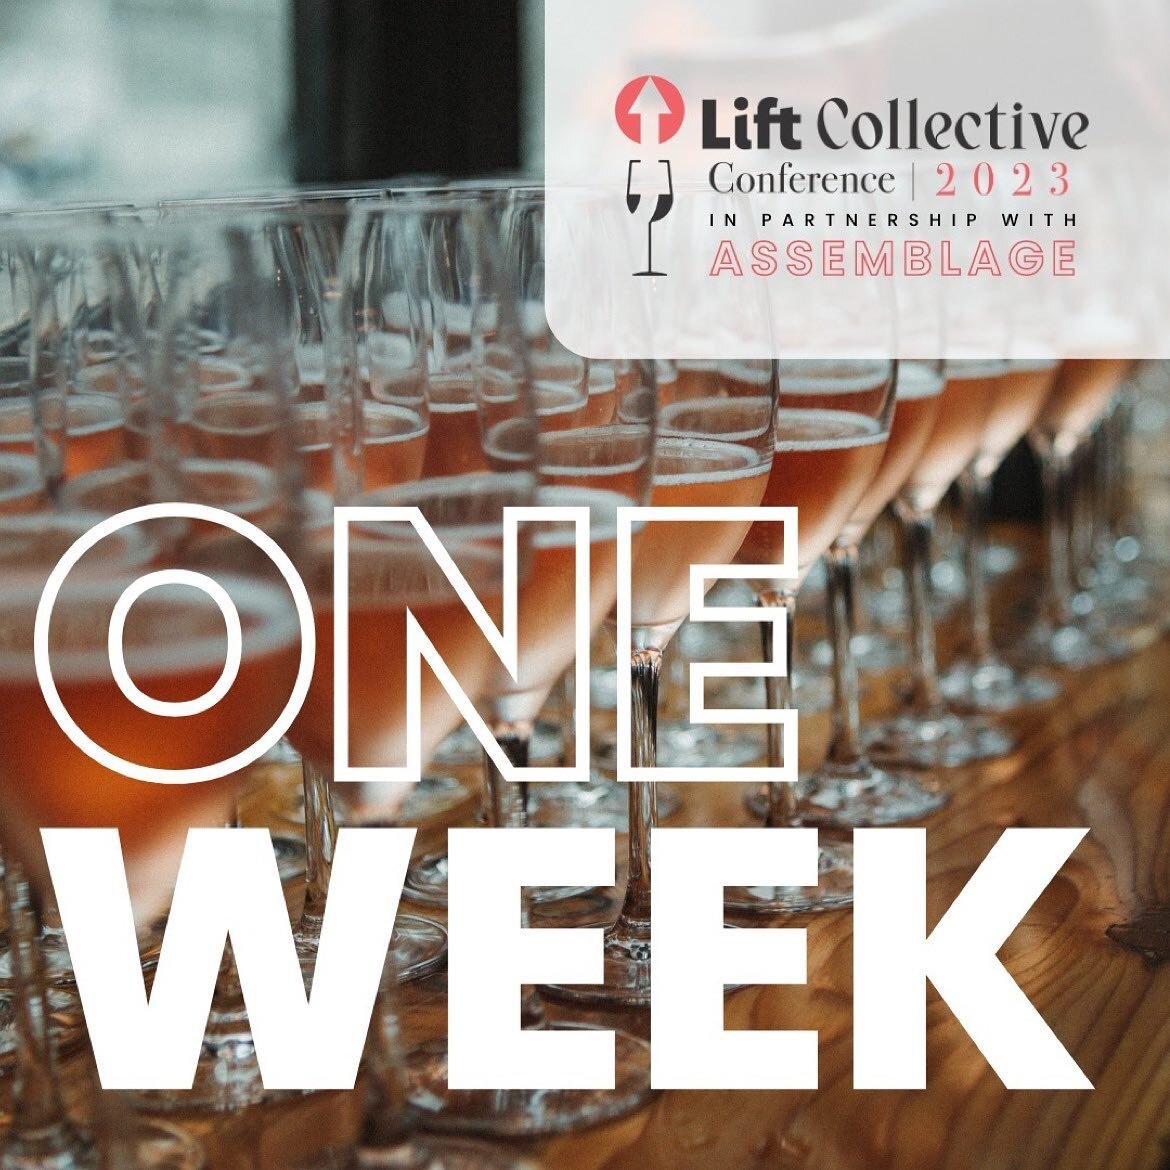 #REPOST @liftcollectiveorg 
&bull;
Only 1 week until our conference!⁠
⁠
Did you get your tickets yet? Head to the link in our bio - in person and virtual tickets are still available! We can&rsquo;t wait to see you there.⁠

📸 @taylorprinsenphotograph